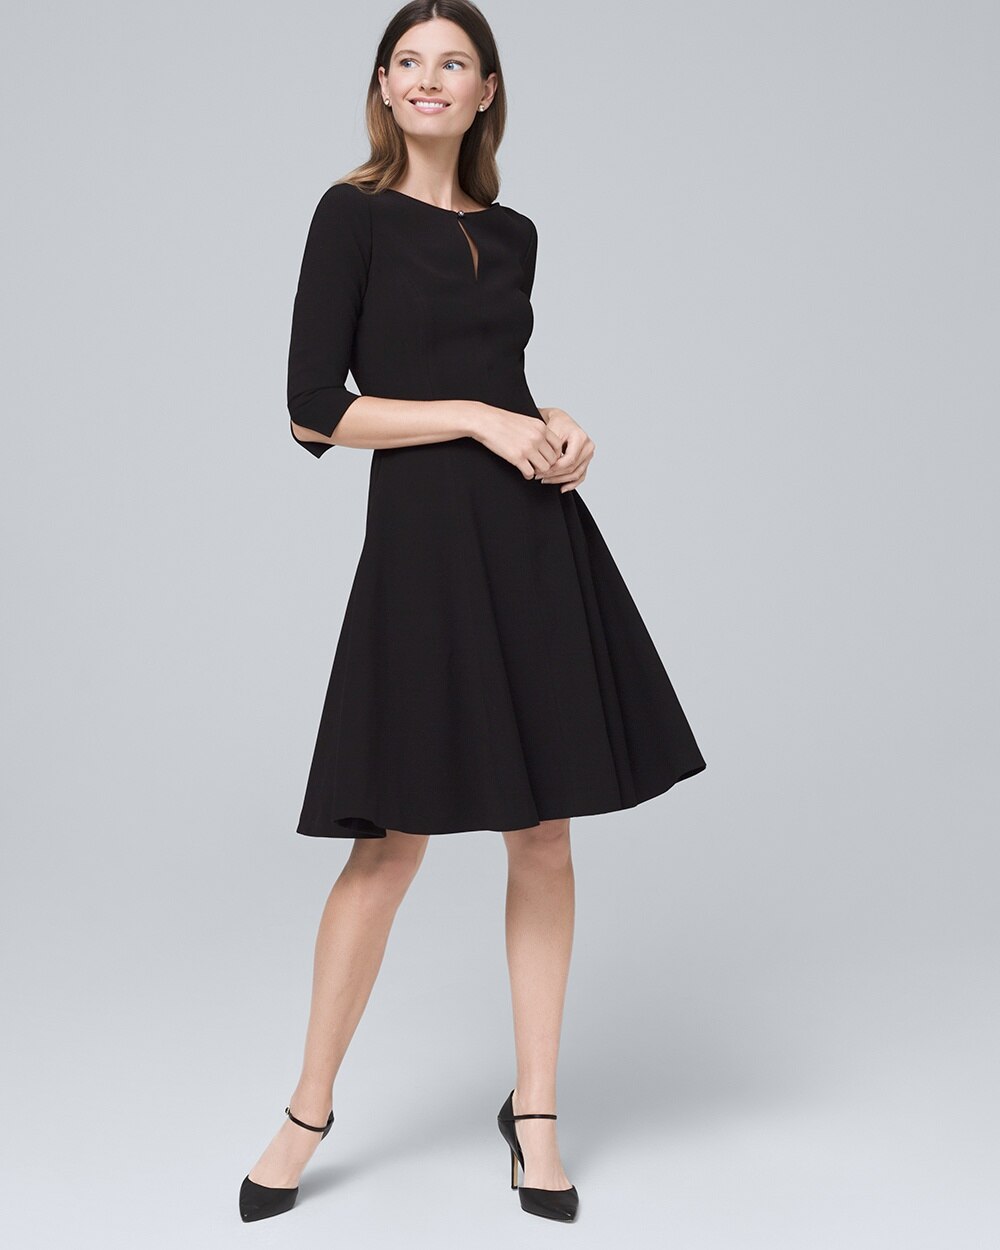 petite black fit and flare dress